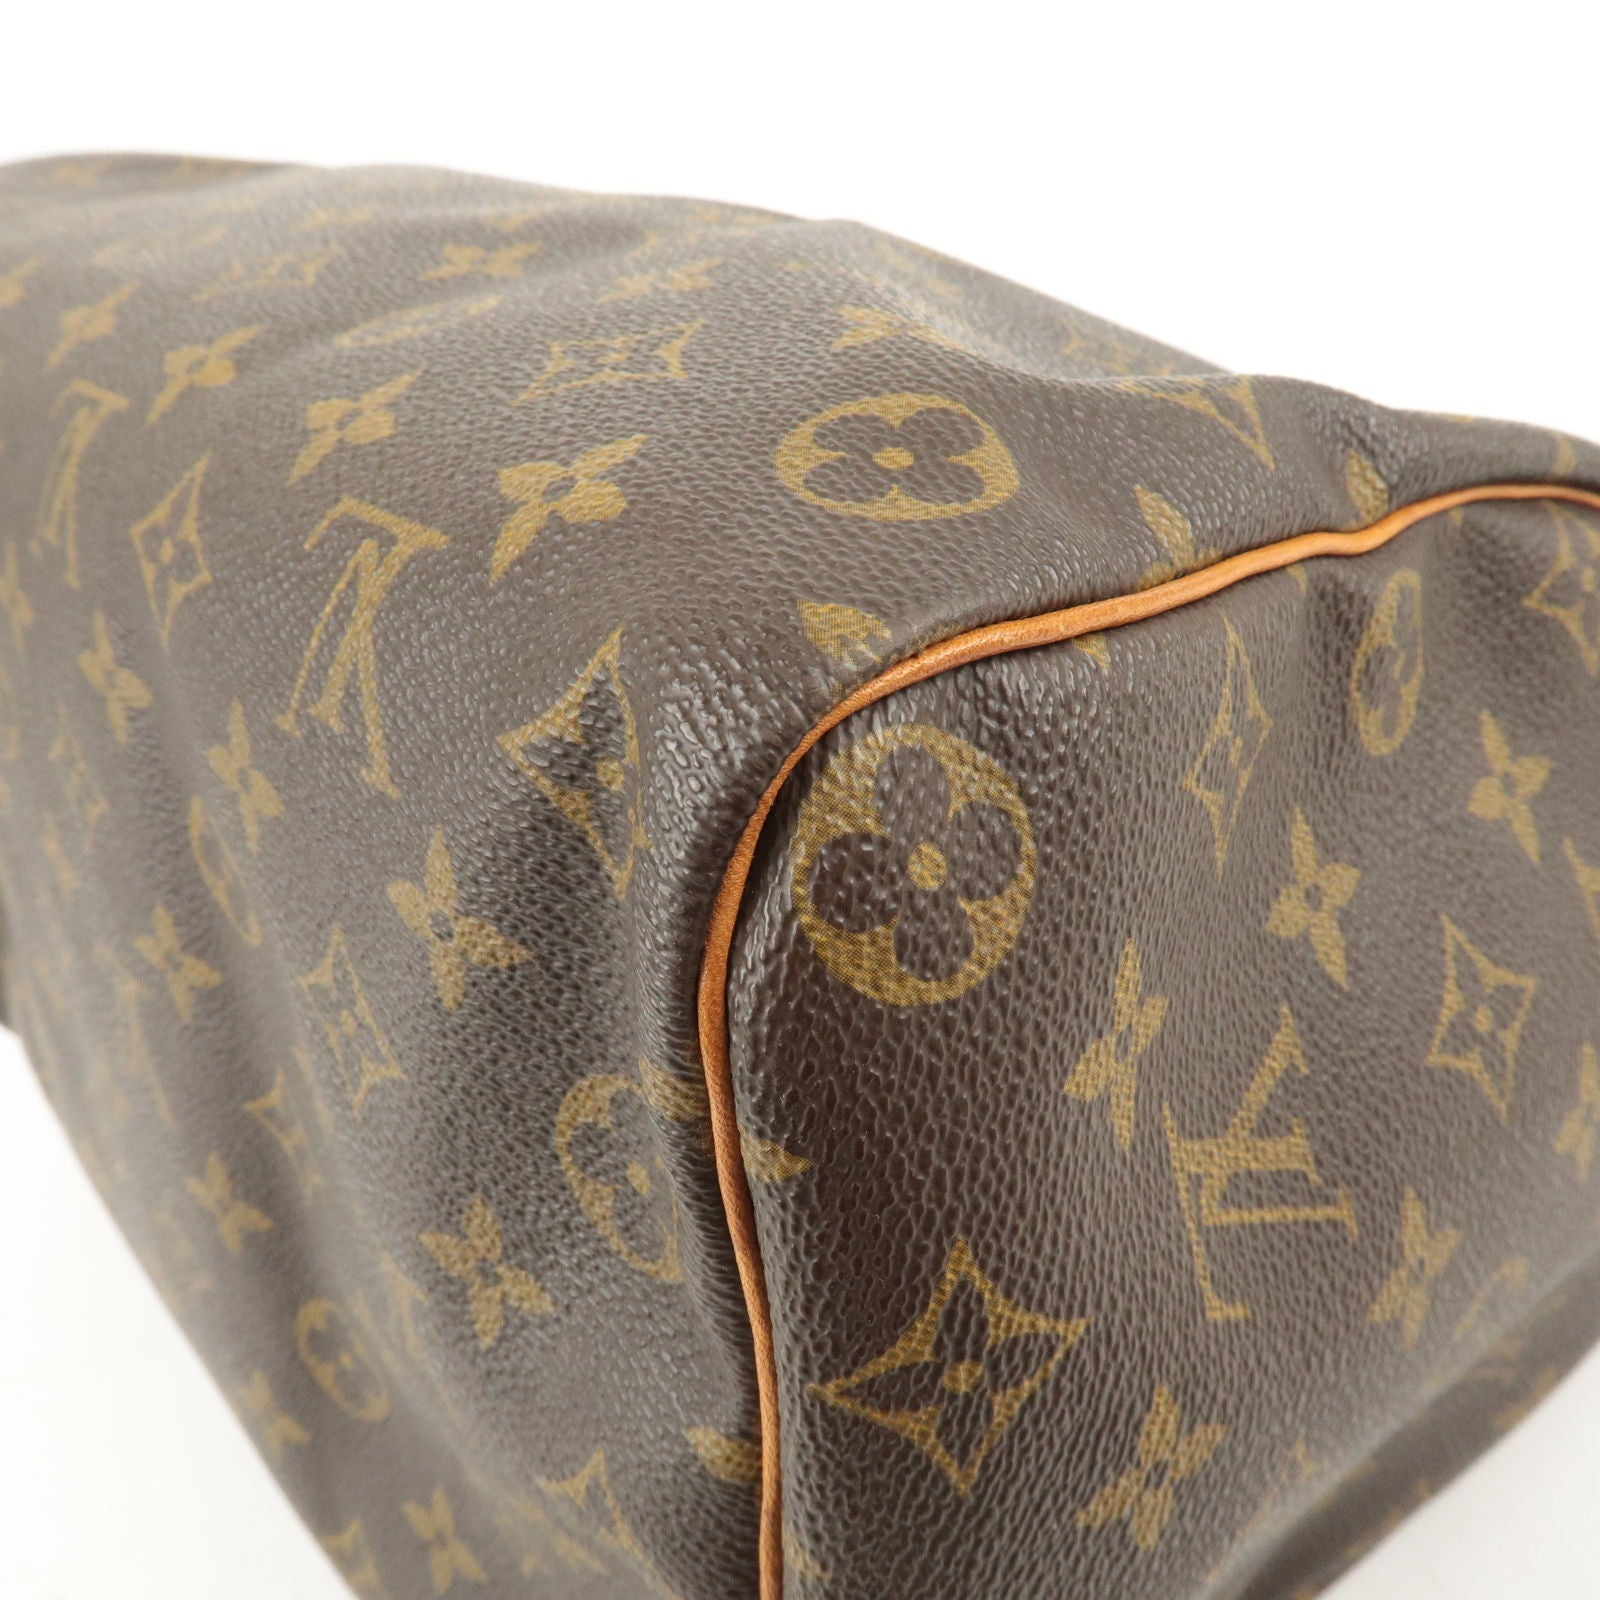 Louis Vuitton 2013 pre-owned Speedy 35 Bandouliere bag